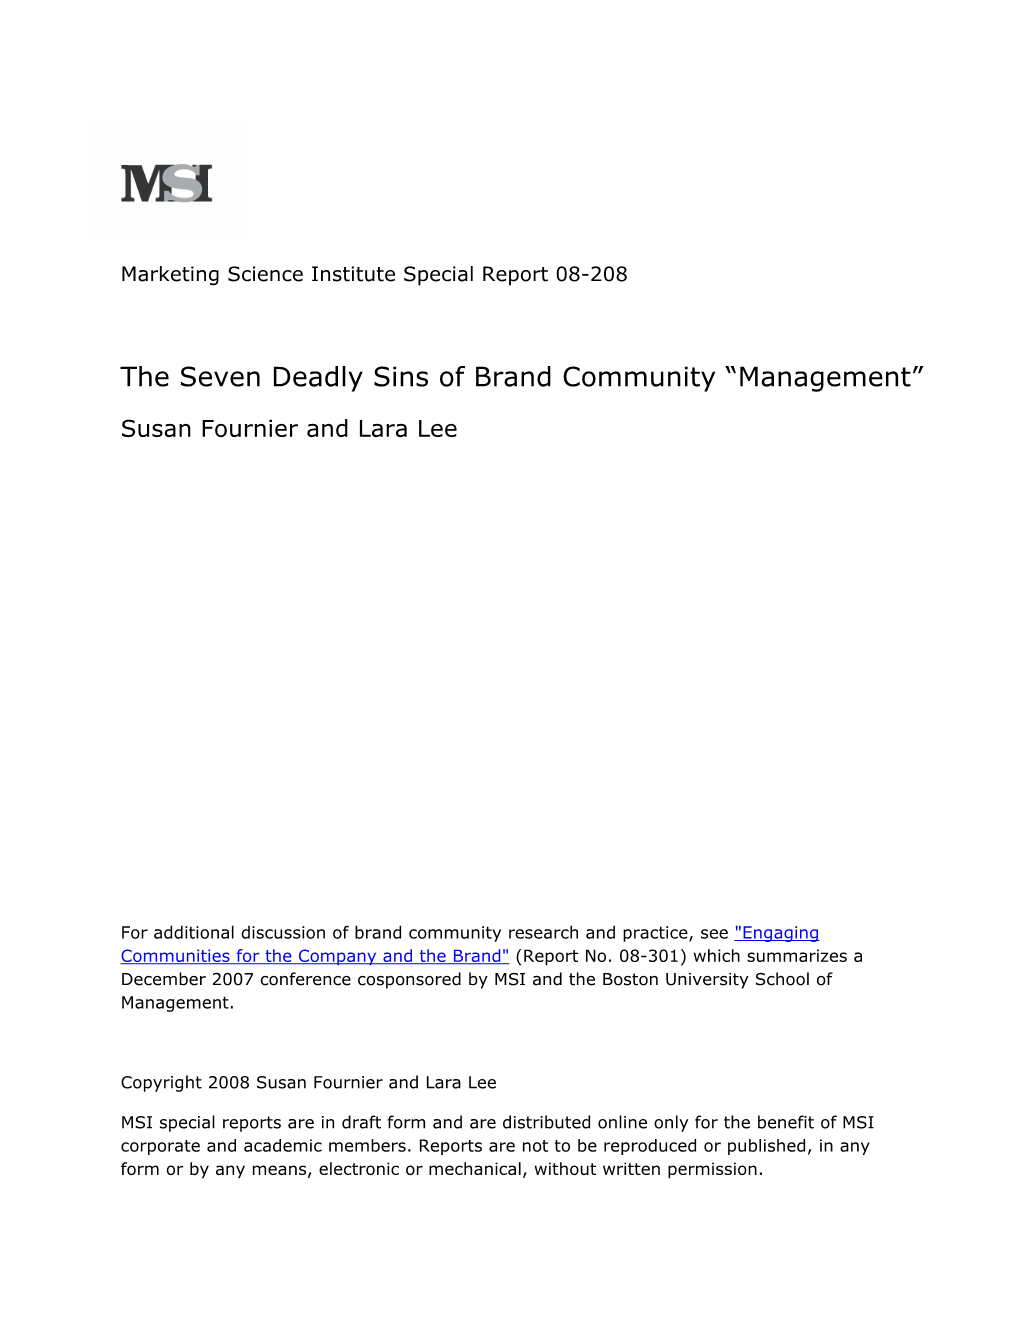 The Seven Deadly Sins of Brand Community “Management”